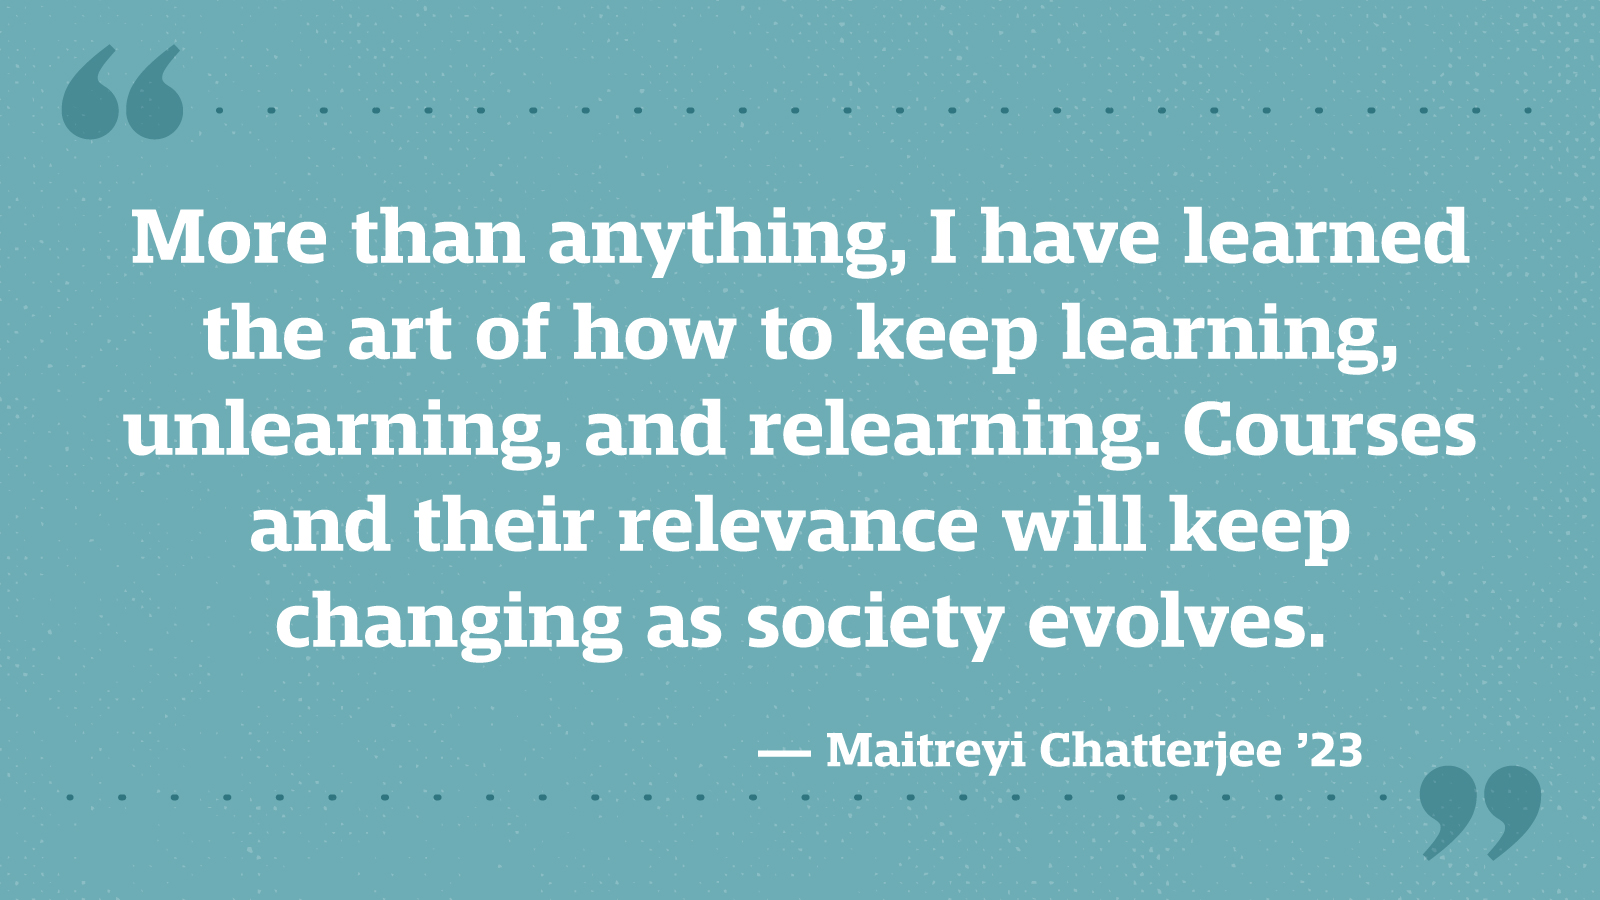 More than anything, I have learned the art of how to keep learning, unlearning, and relearning. Courses and their relevance will keep changing as society evolves. — Maitreyi Chatterjee ’23